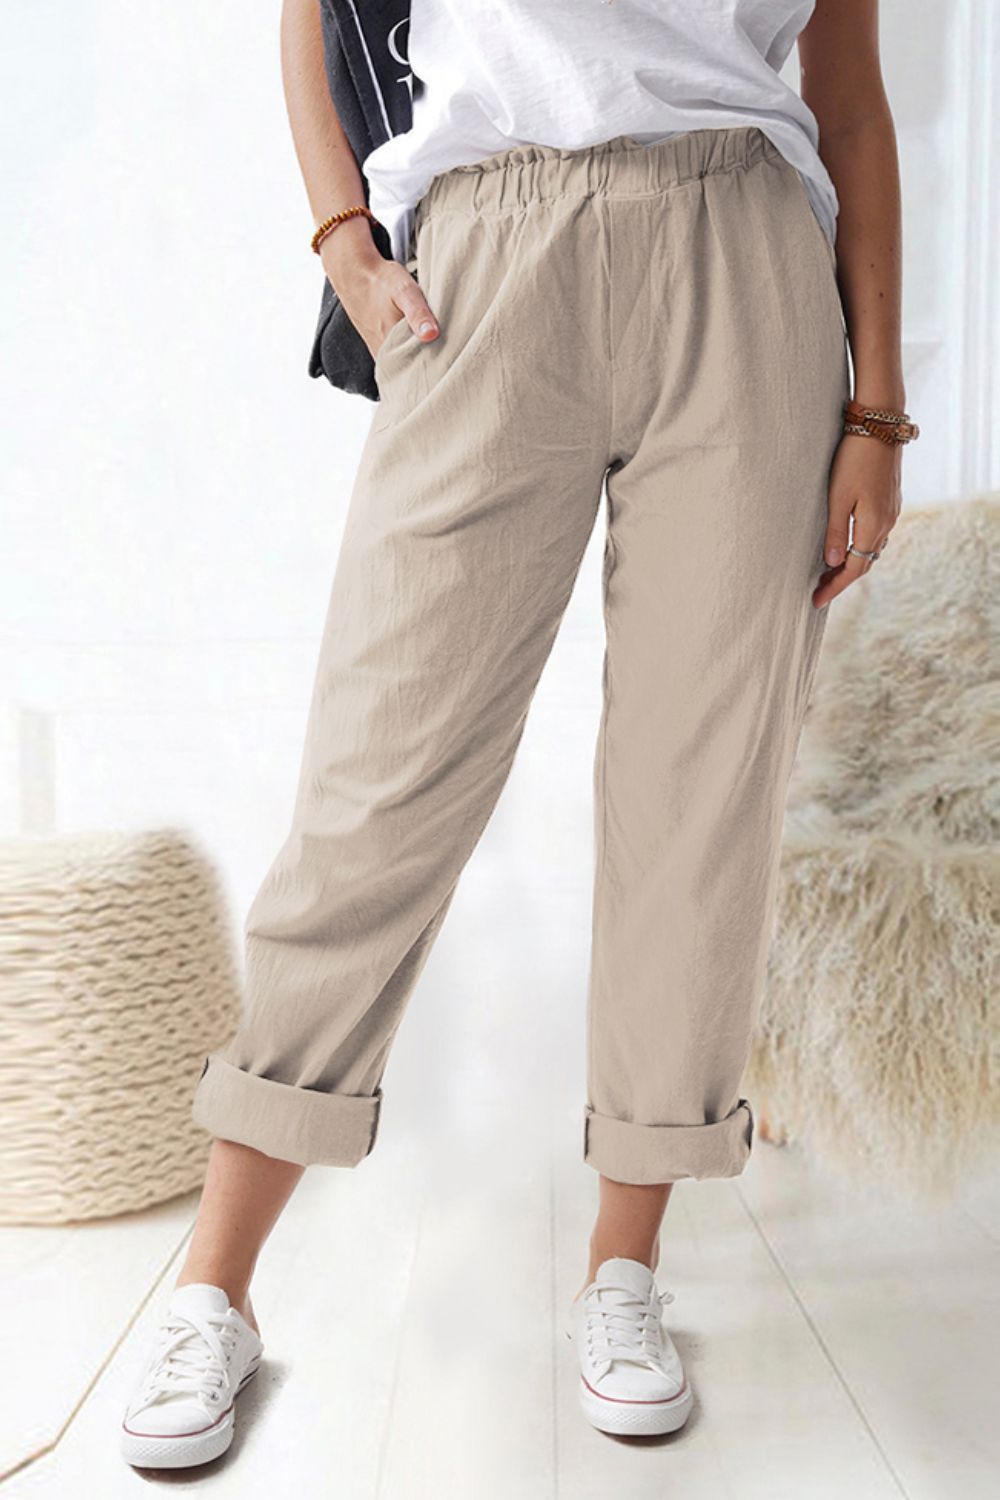 Ebony Forest Pocketed Cargo 100% Viscose Pants | Hypoallergenic - Allergy Friendly - Naturally Free